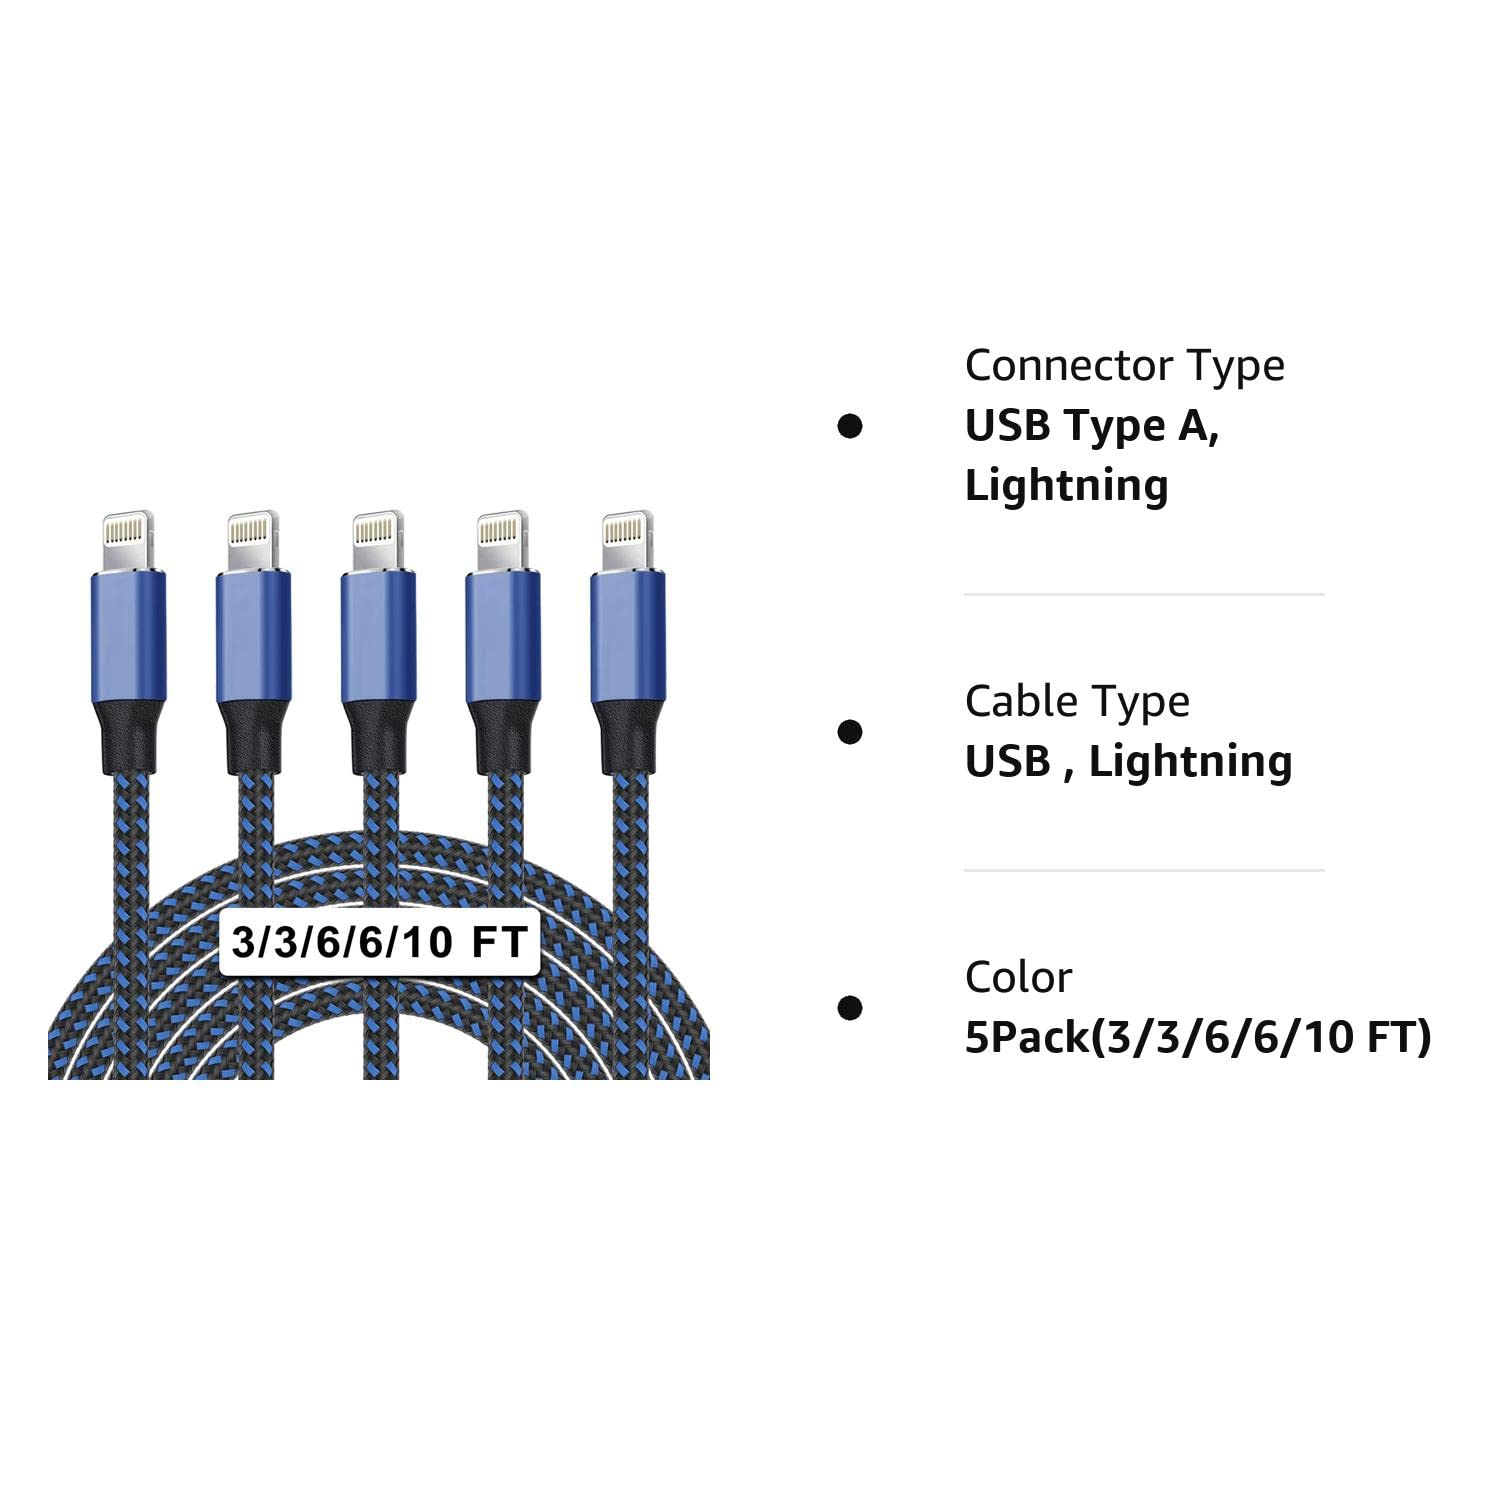 [Apple MFi Certified] iPhone Charger 5Pack(3/3/6/6/10 FT)Long Lightning Cable Fast Charging High Speed Data Sync USB Cable Compatible iPhone 14/13/12/11 Pro Max/XS MAX/XR/XS/X/8/7/Plus/6S iPad AirPods